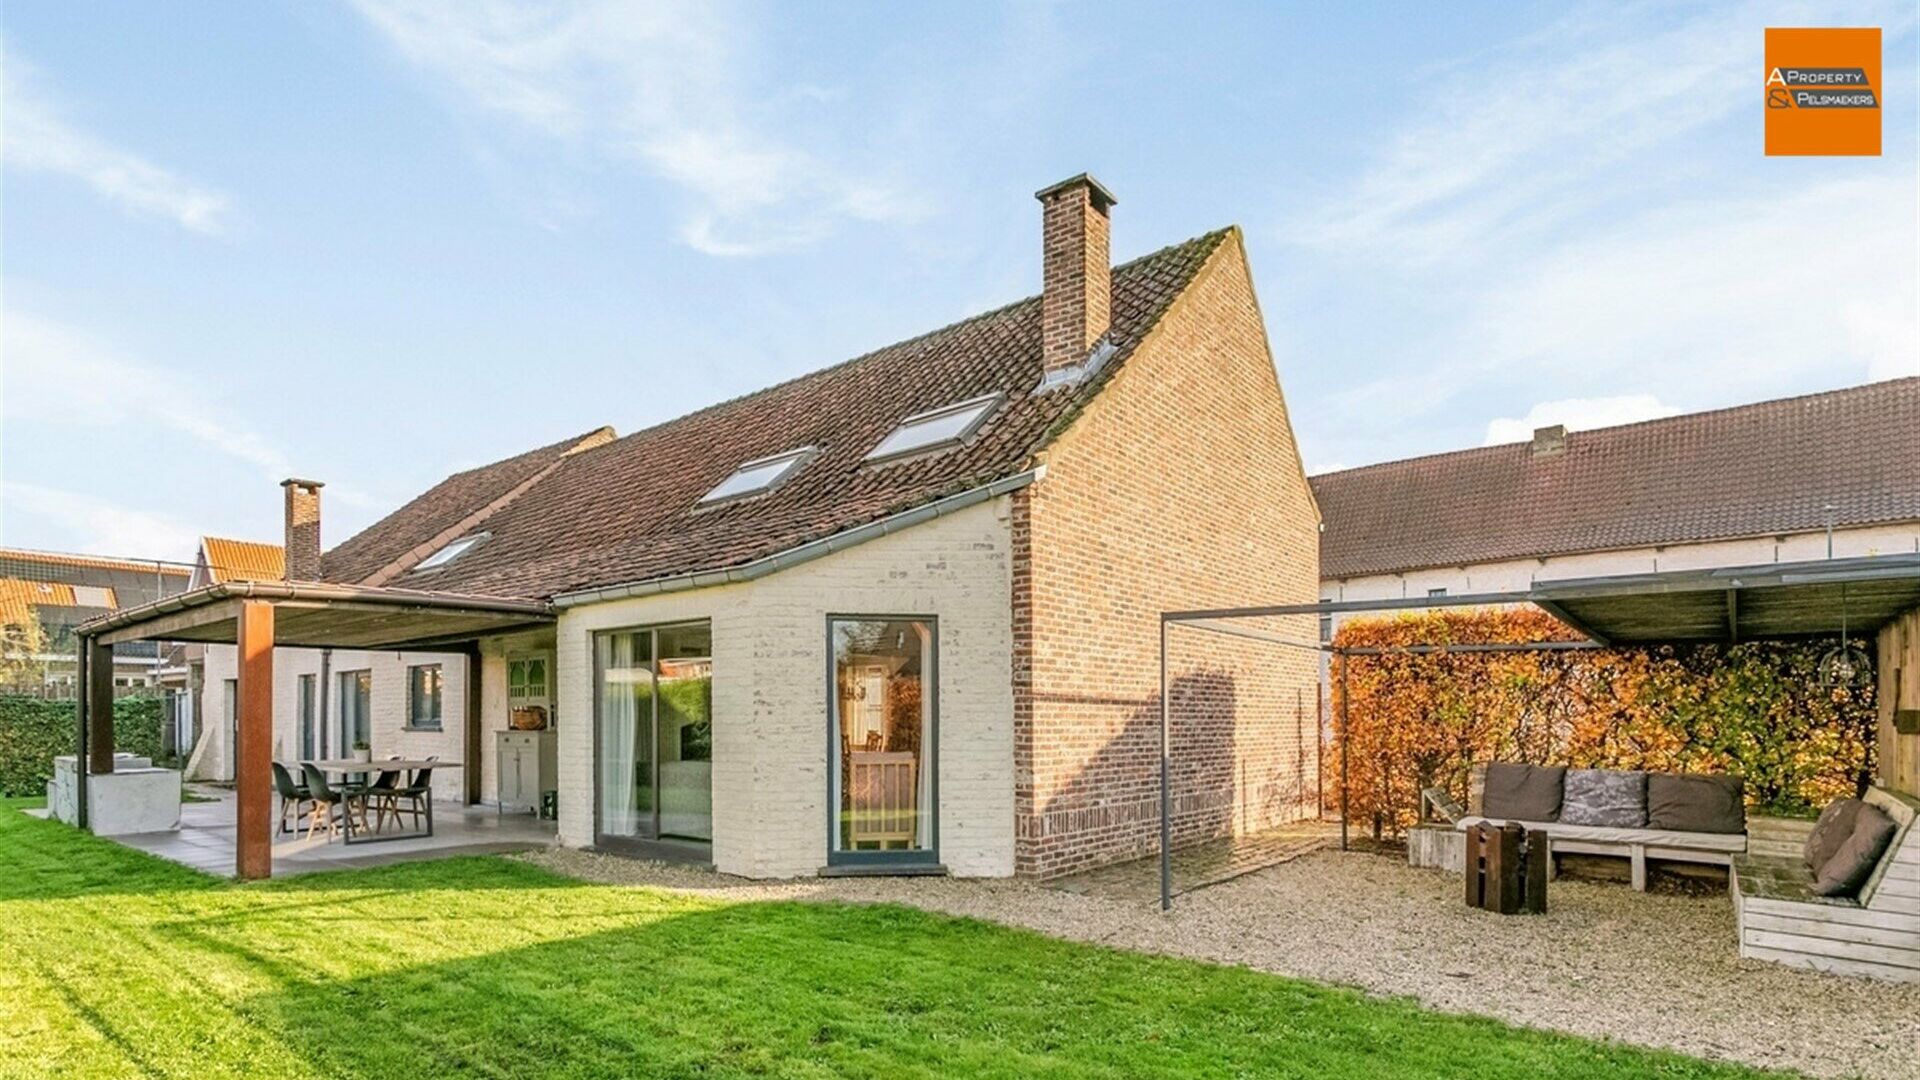 Villa for sale in ERPS-KWERPS